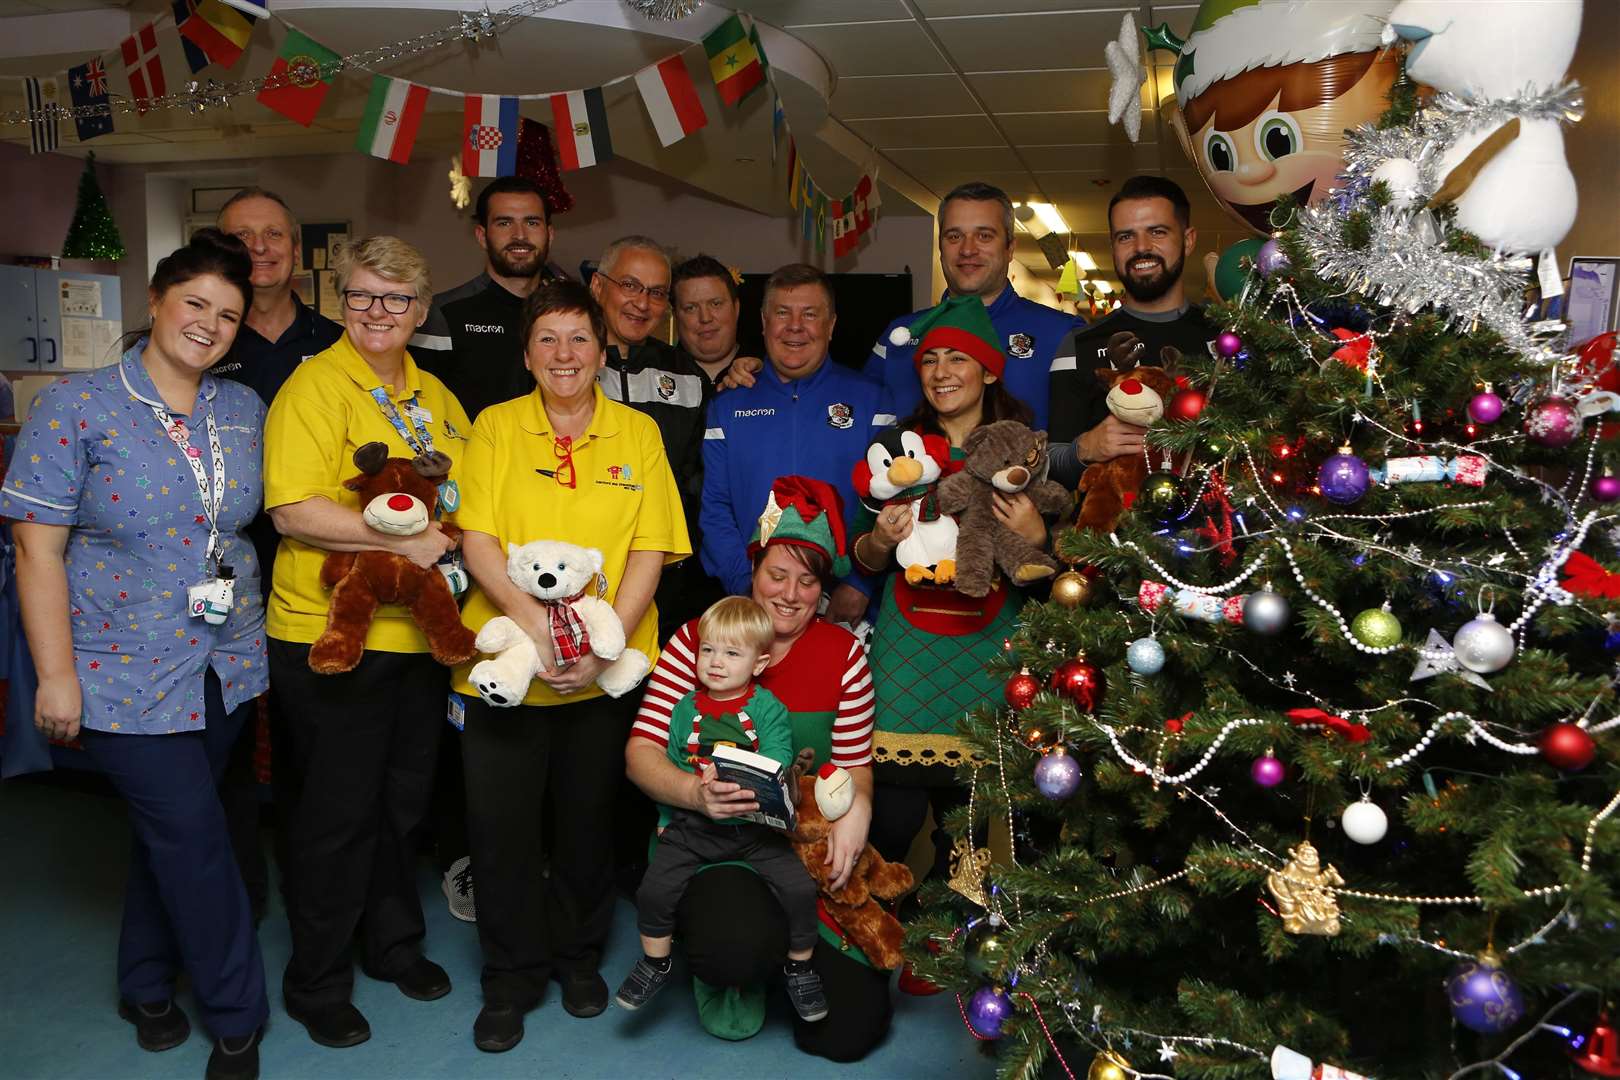 Hopsital Staff, Dartford FC and National Elf service on Willow Ward. Picture: Andy Jones